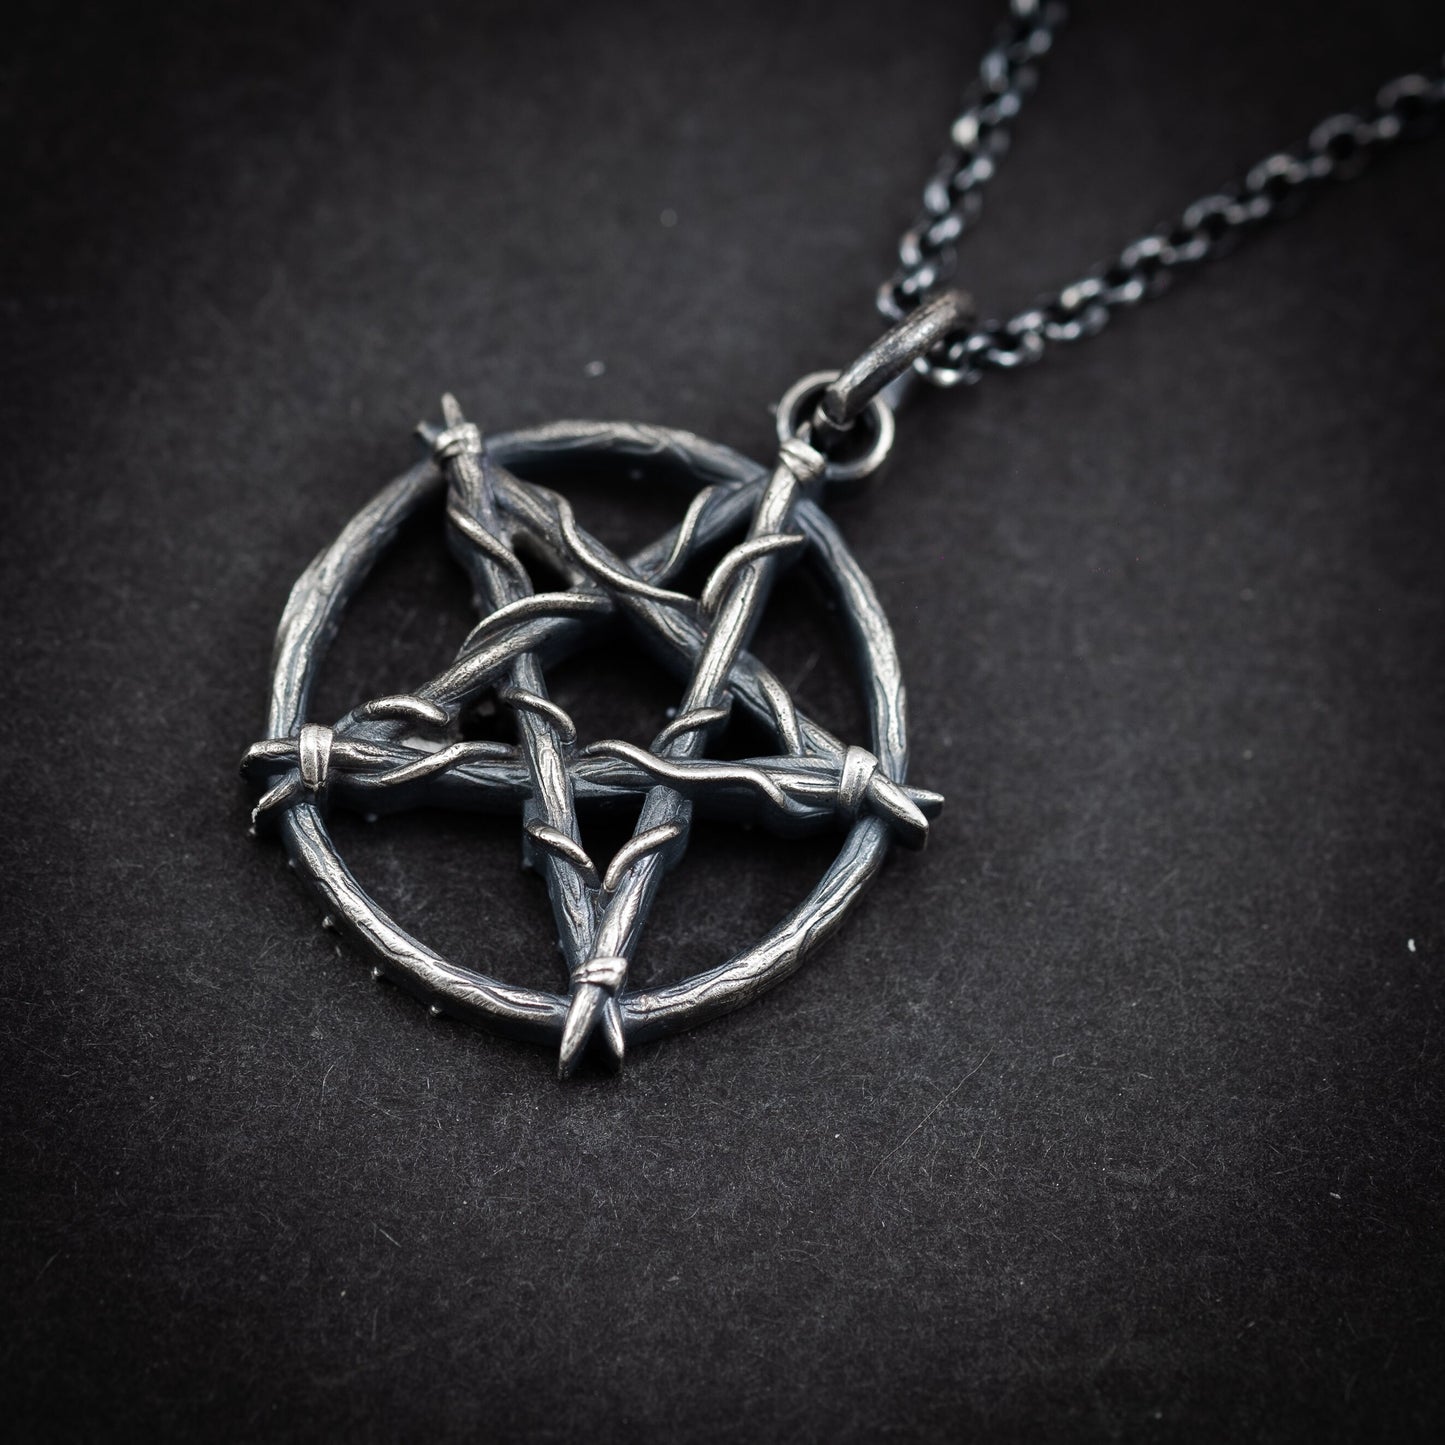 Silver Pentagram necklace pendant, pentacle necklace, Occult handmade jewelry , unique gift for men or women, wiccan necklace